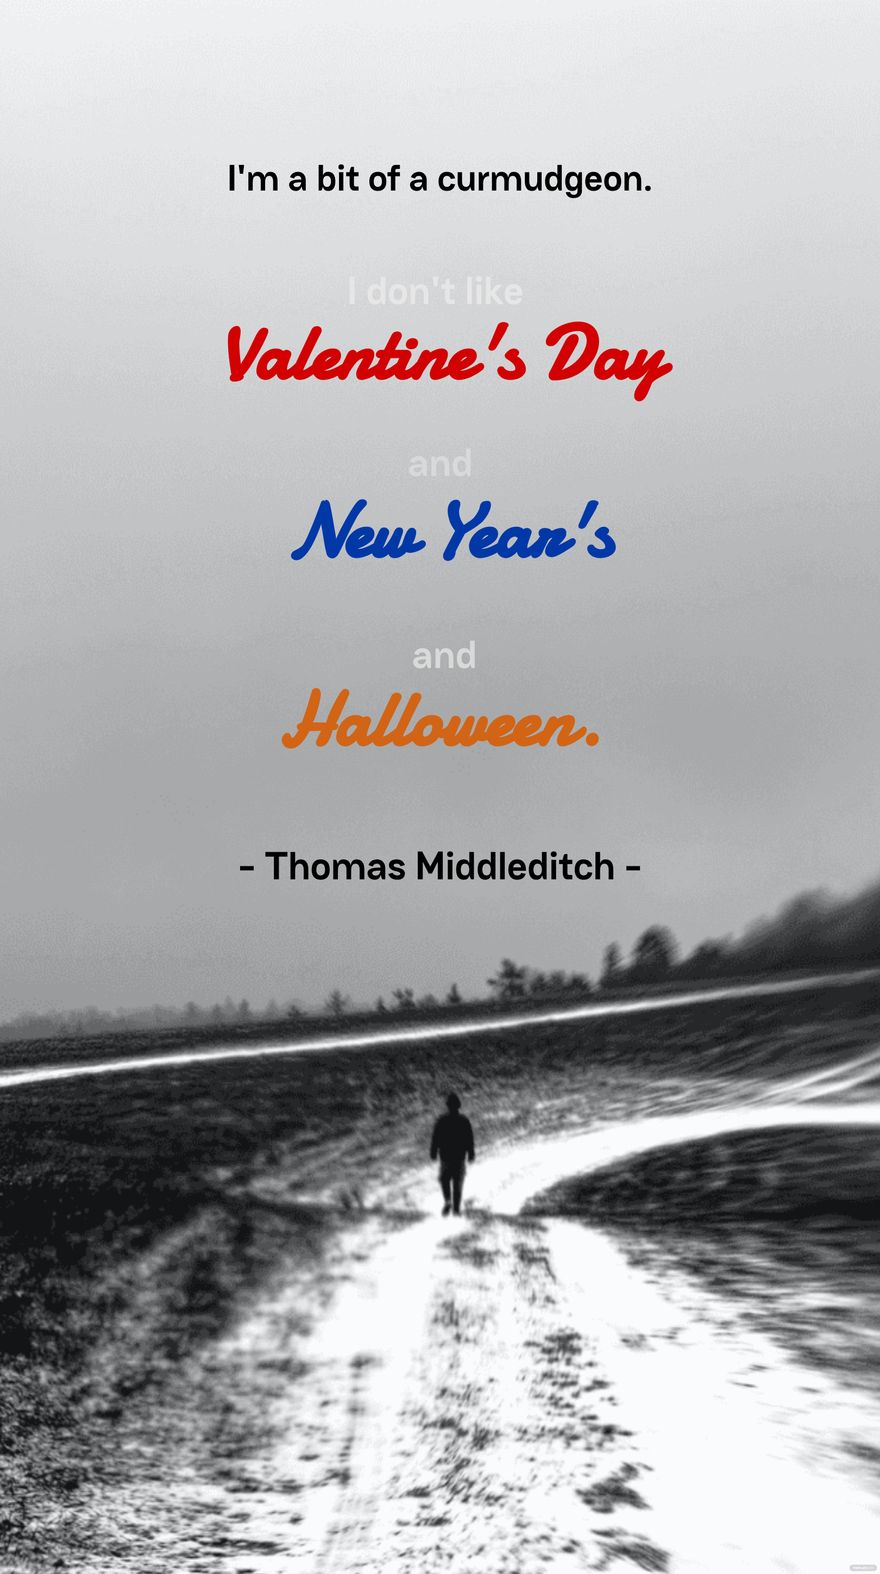 Thomas Middleditch - I'm a bit of a curmudgeon. I don't like Valentine's Day and New Year's and Halloween.